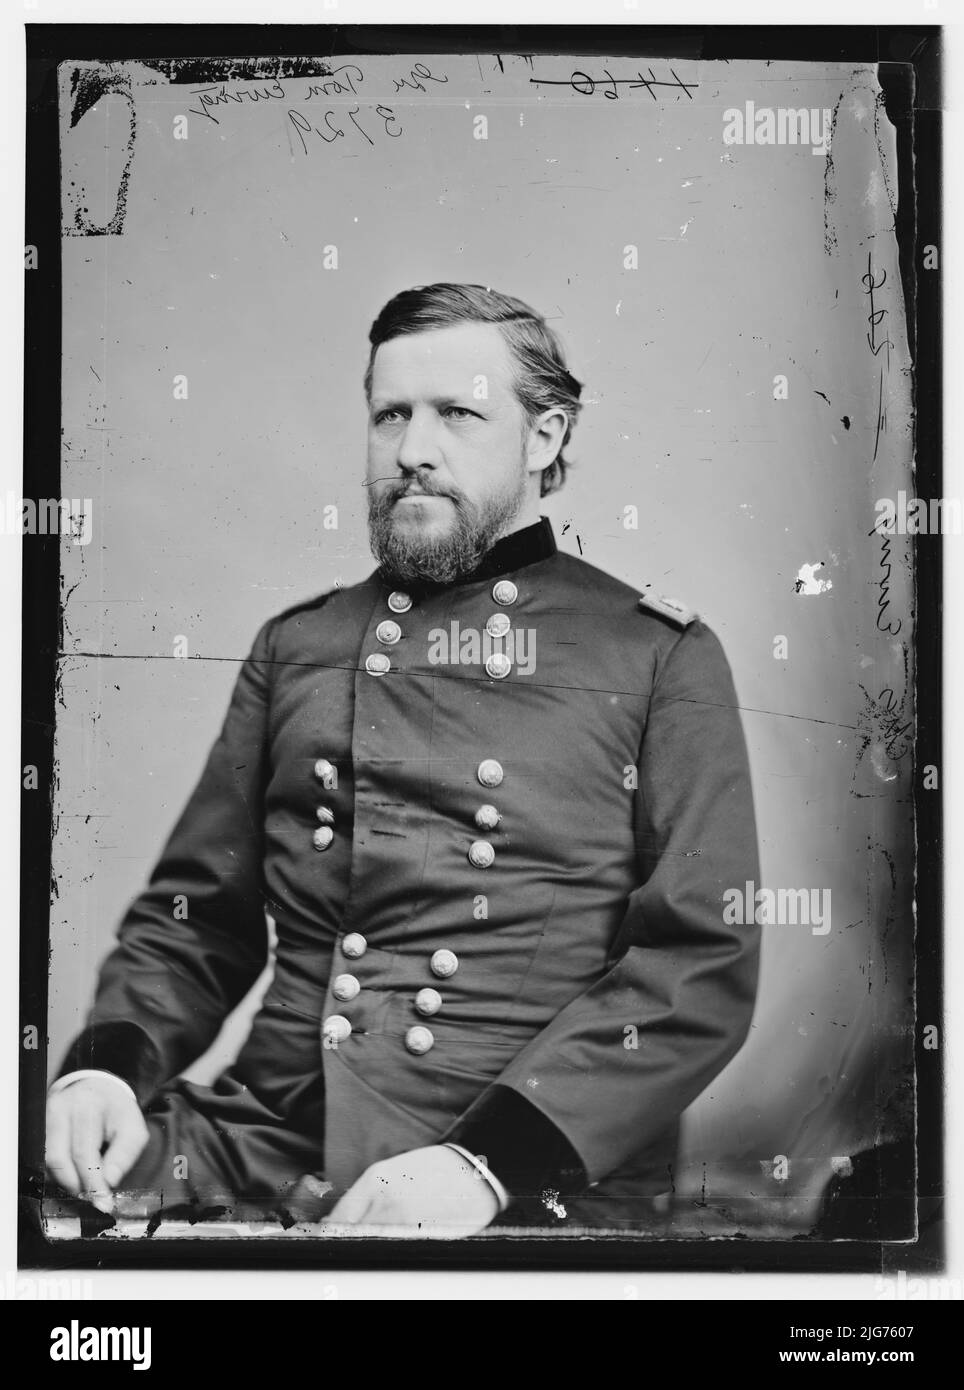 General Thomas Ewing, U.S.A., between 1860 and 1875. [Politician, lawyer, Union Army soldier: first chief justice of Kansas; colonel of the 11th Kansas Infantry; trustee of Ohio Soldiers' and Sailors' Orphans' Home. He was killed when struck by a New York City omnibus]. Stock Photo